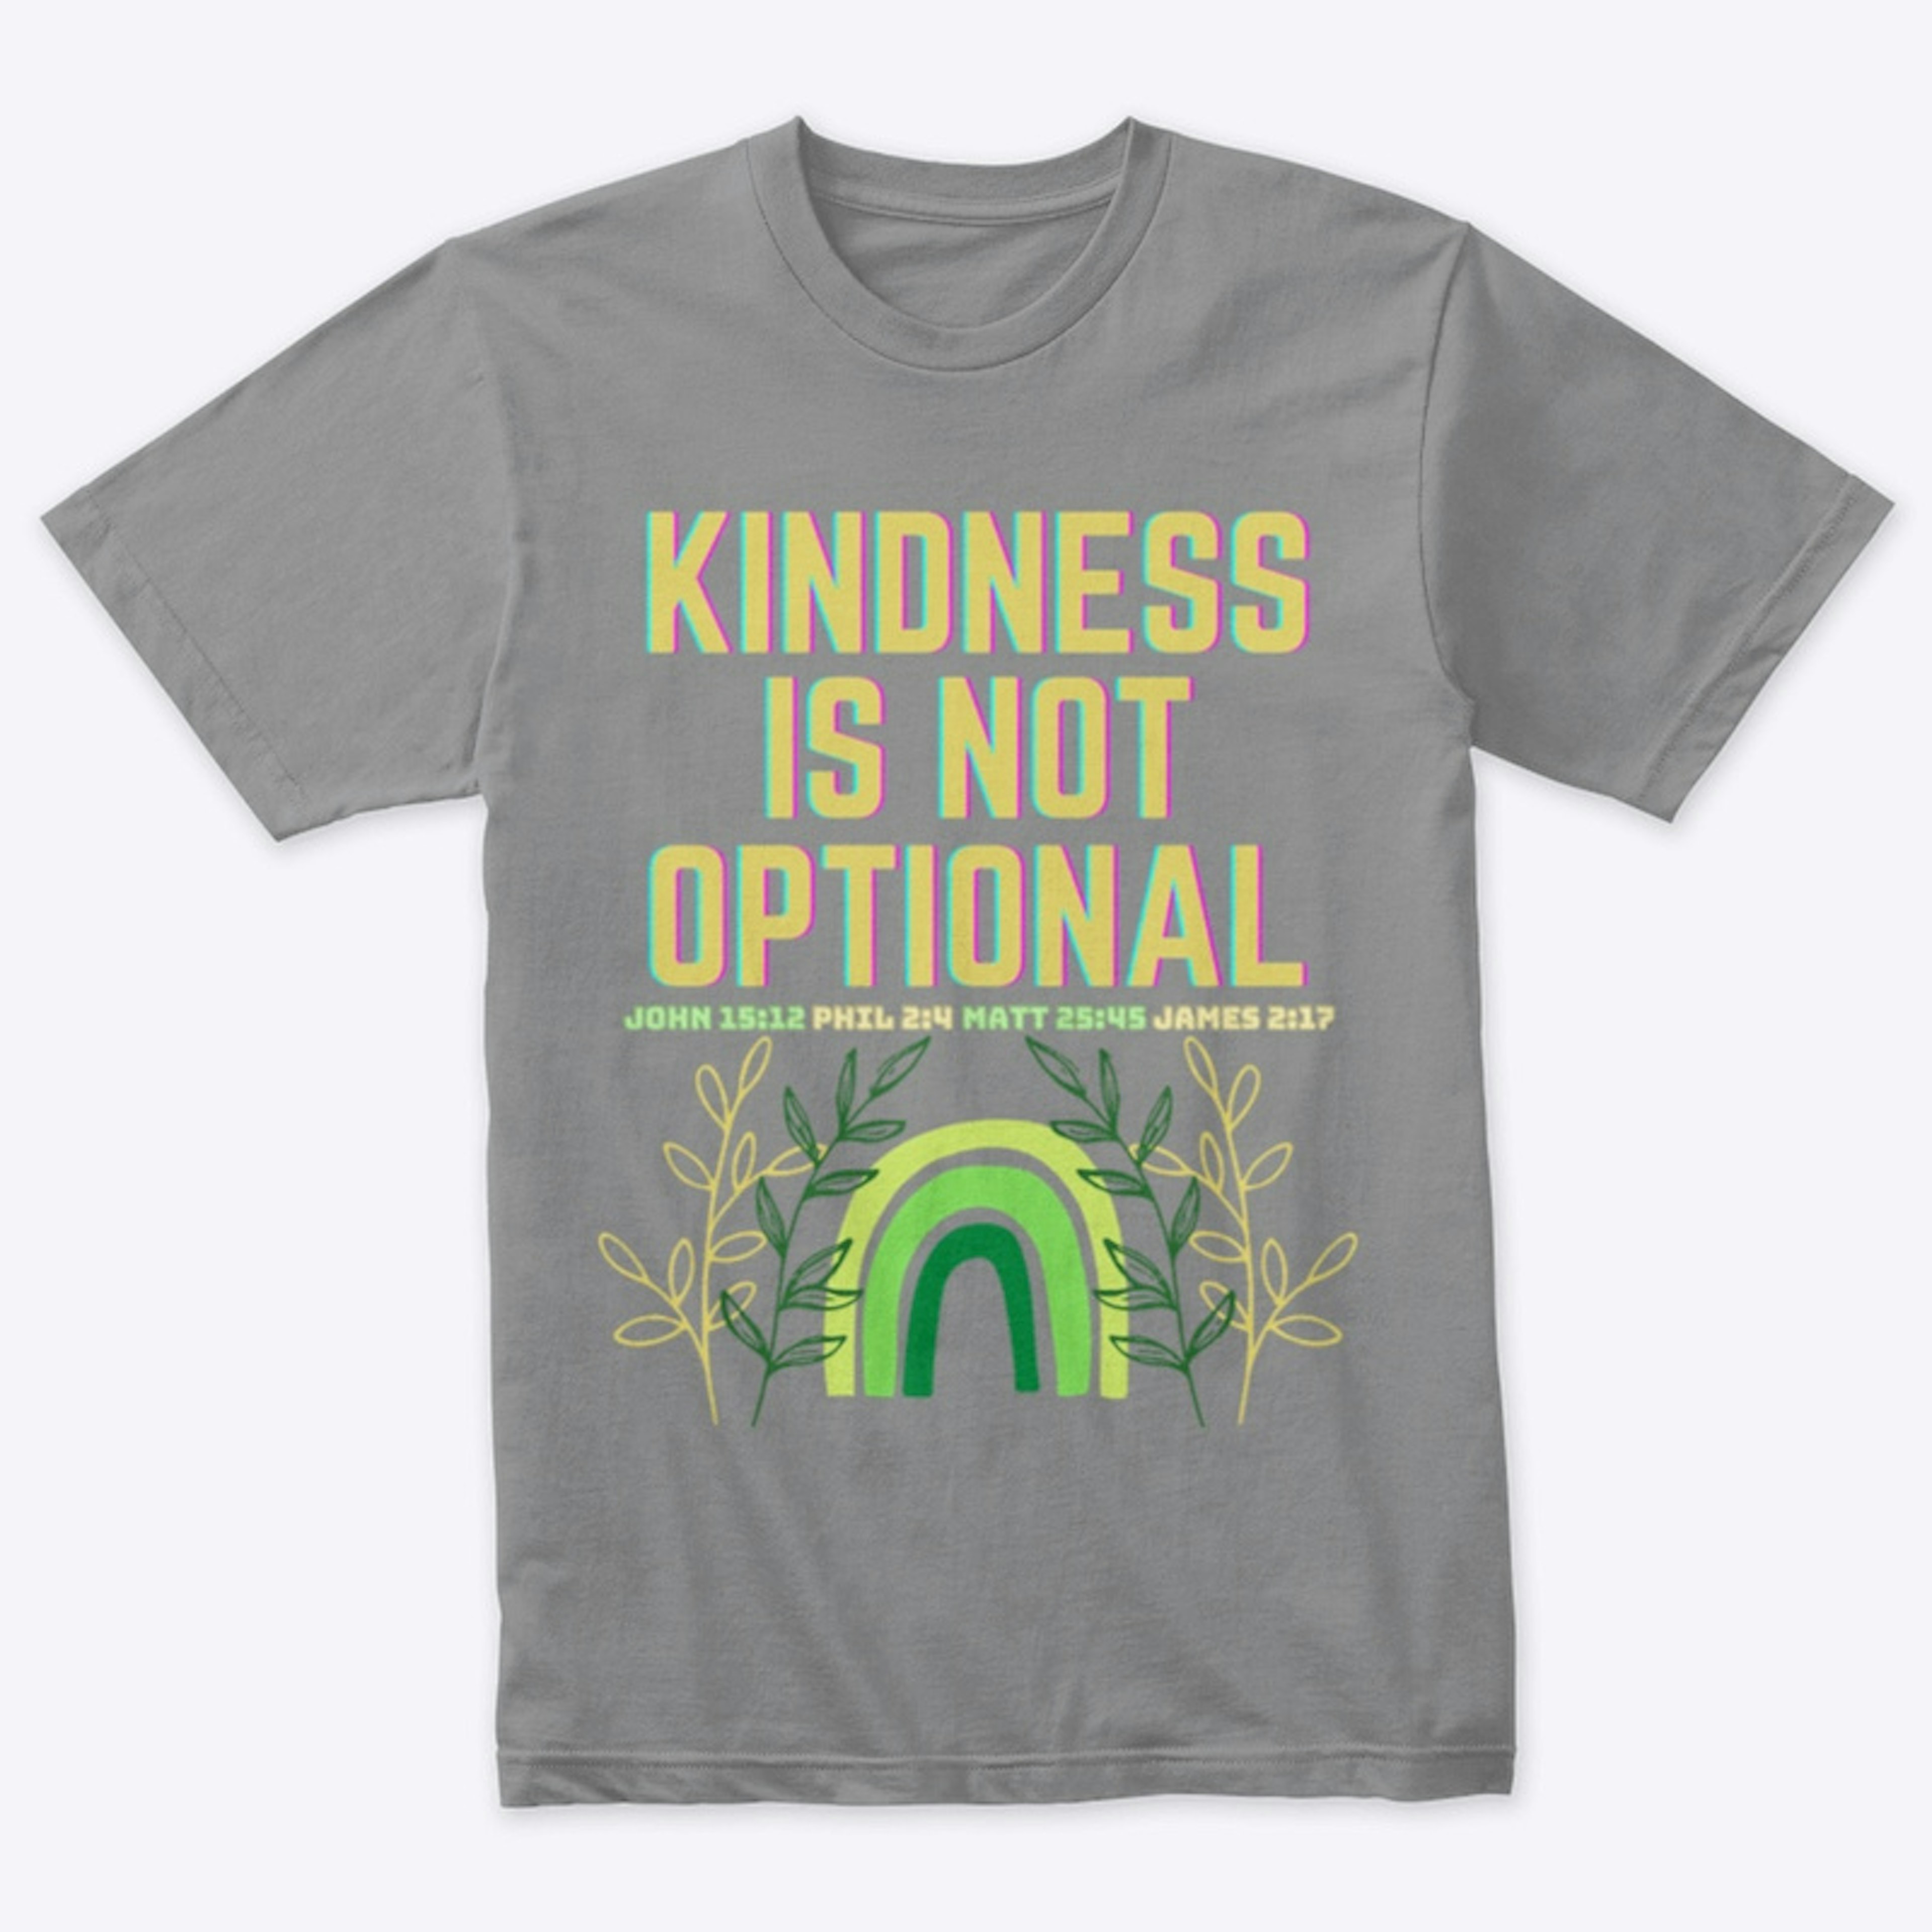 Kindness is not optional